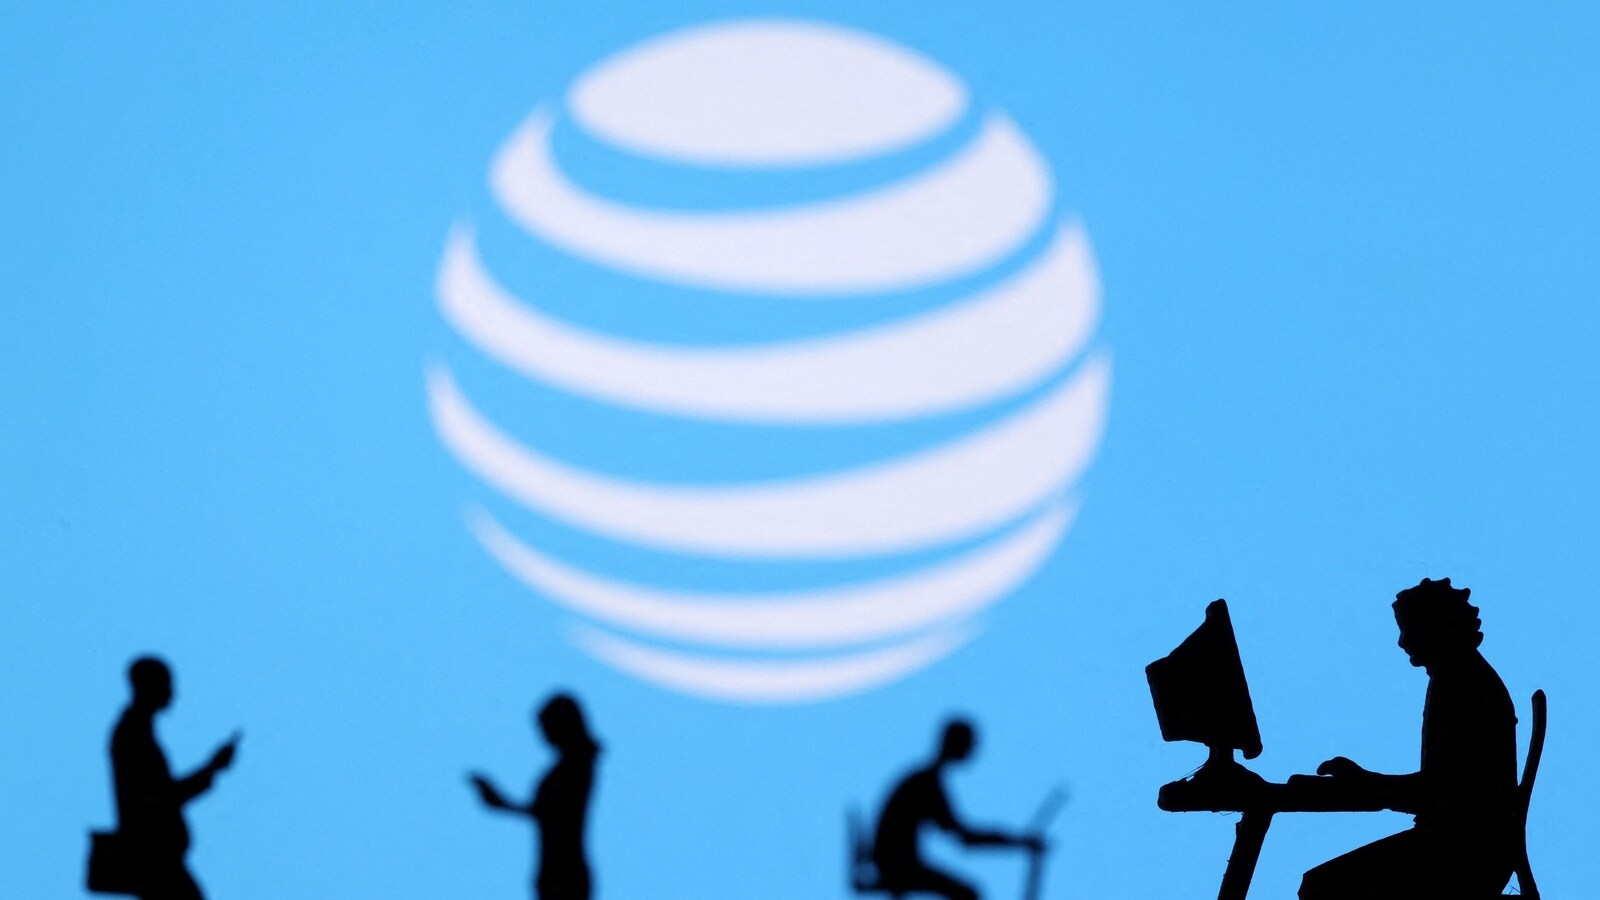 AT&T and AST SpaceMobile Are Partnering To Offer “True Broadband” From Satellite Phone Service